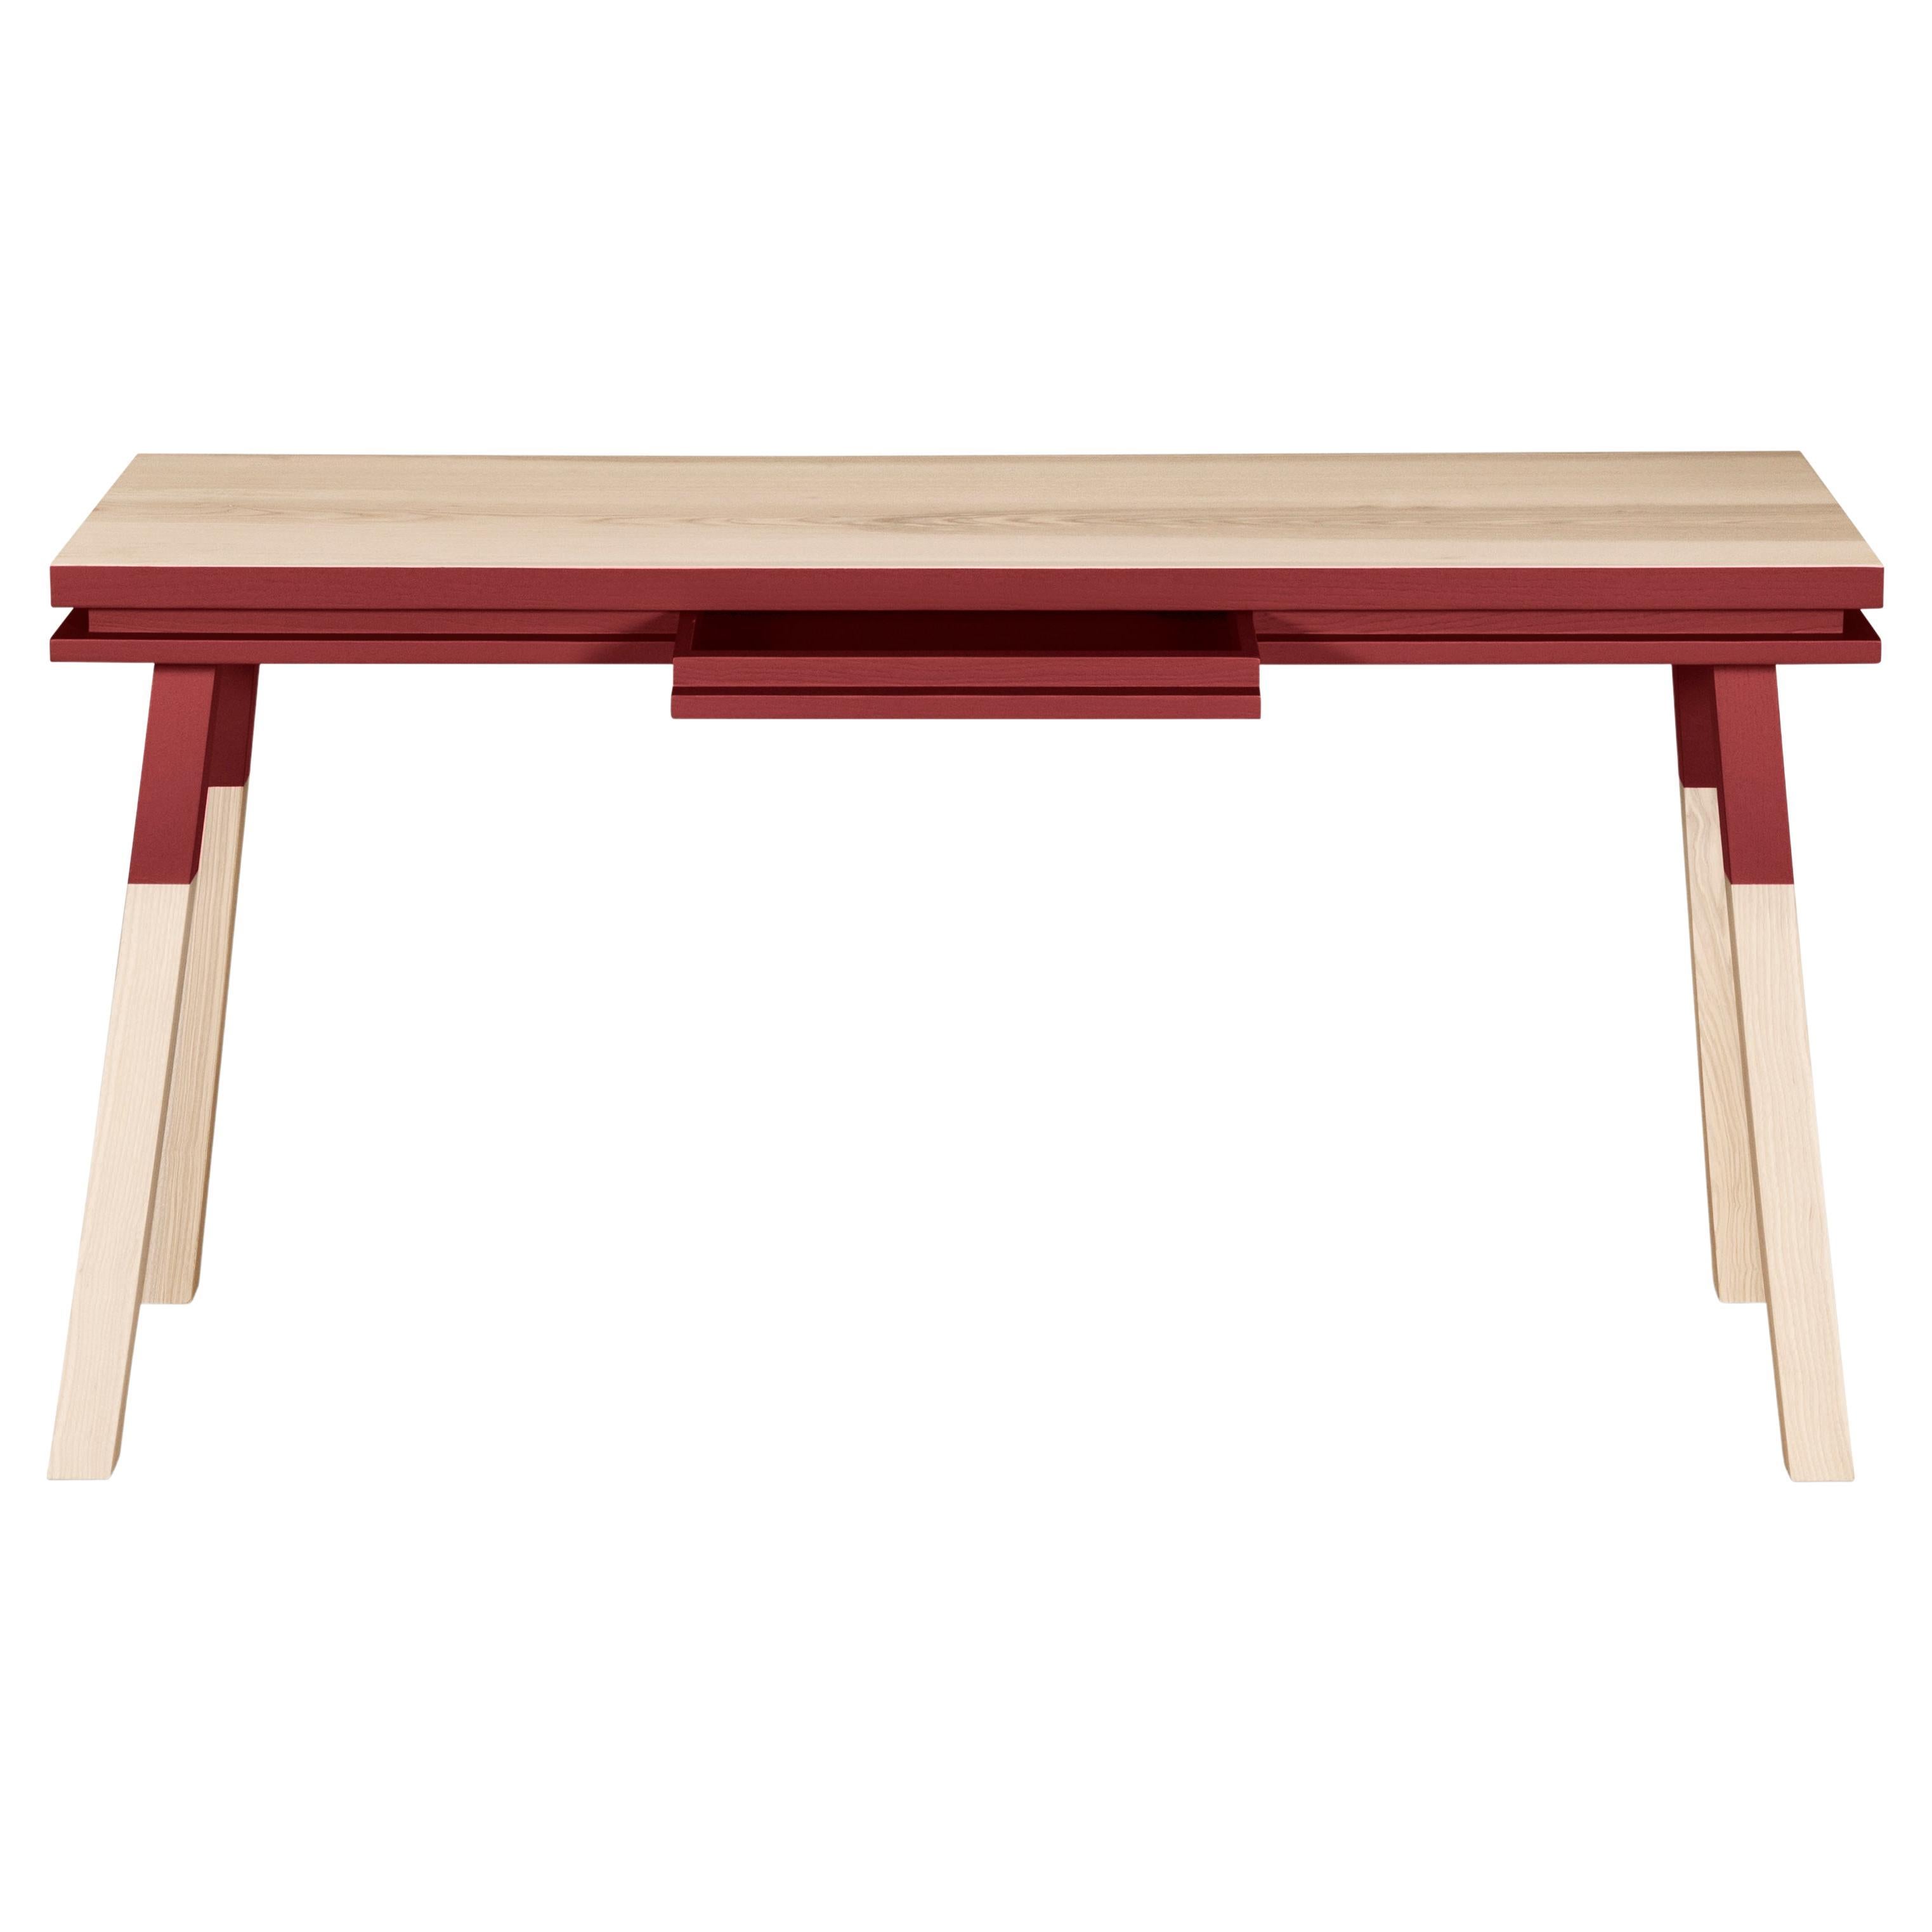 Red Rectangular Desk in Solid Wood, Designed in Paris and Made in France